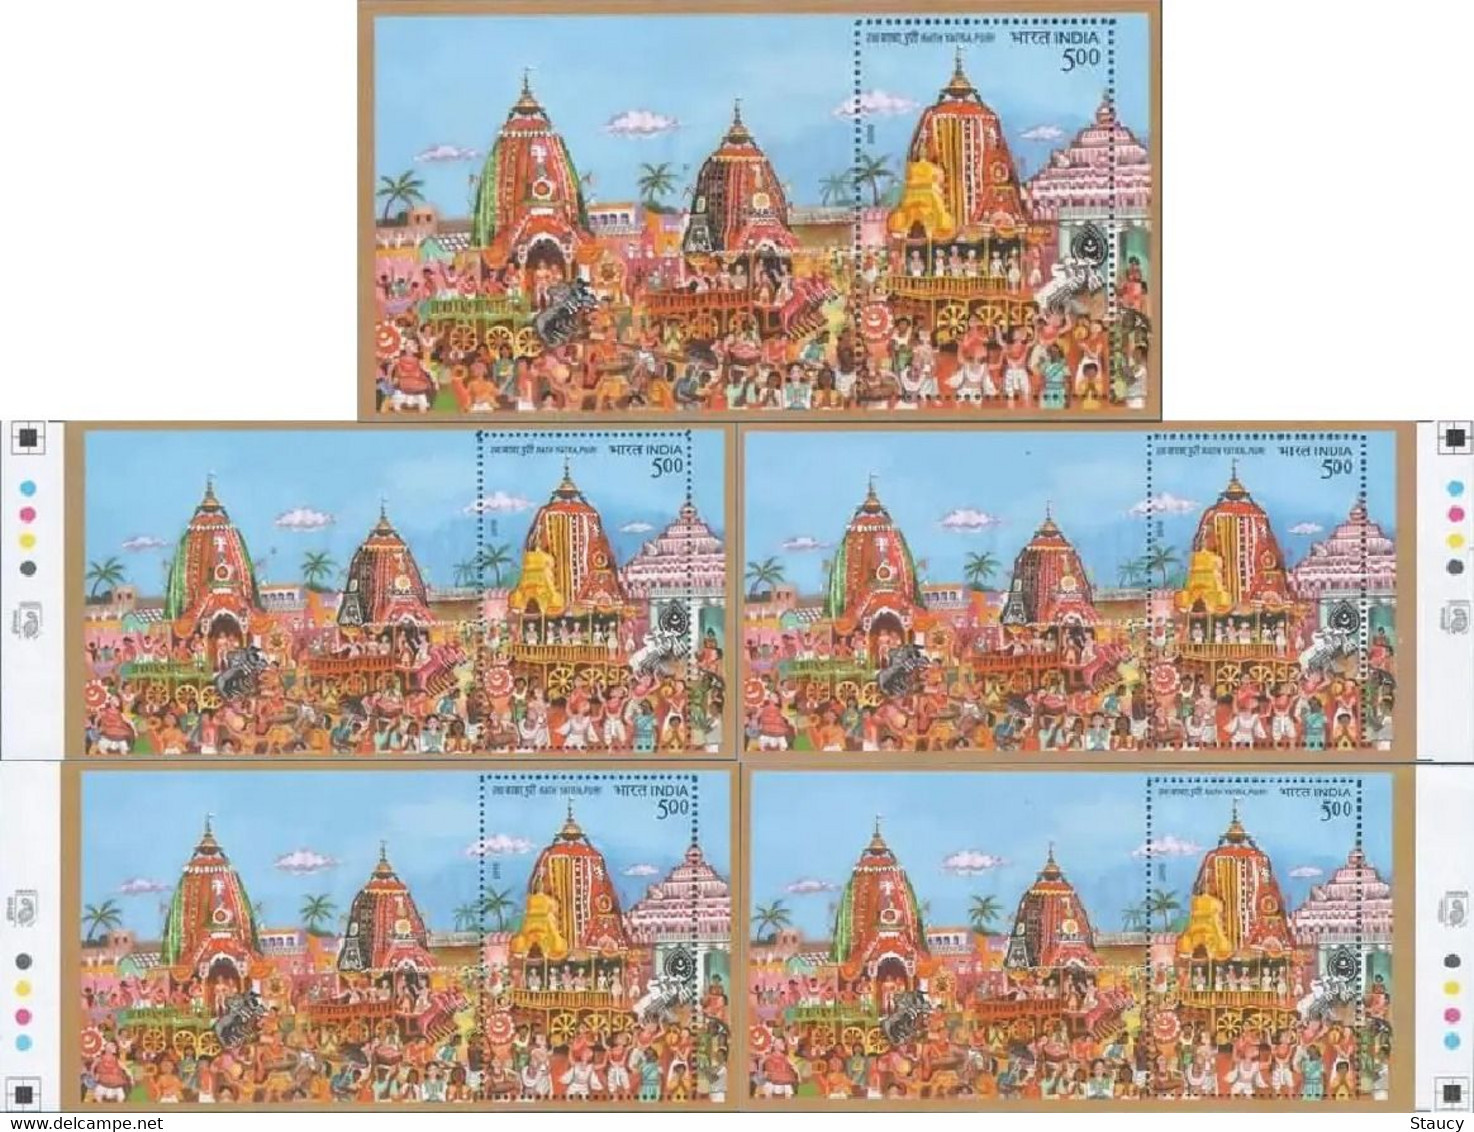 India 2010 RATH YATRA PURI MS, "5 DIFFERENT TYPE MS" Rs.5.00 MS MNH - Fouten Op Zegels